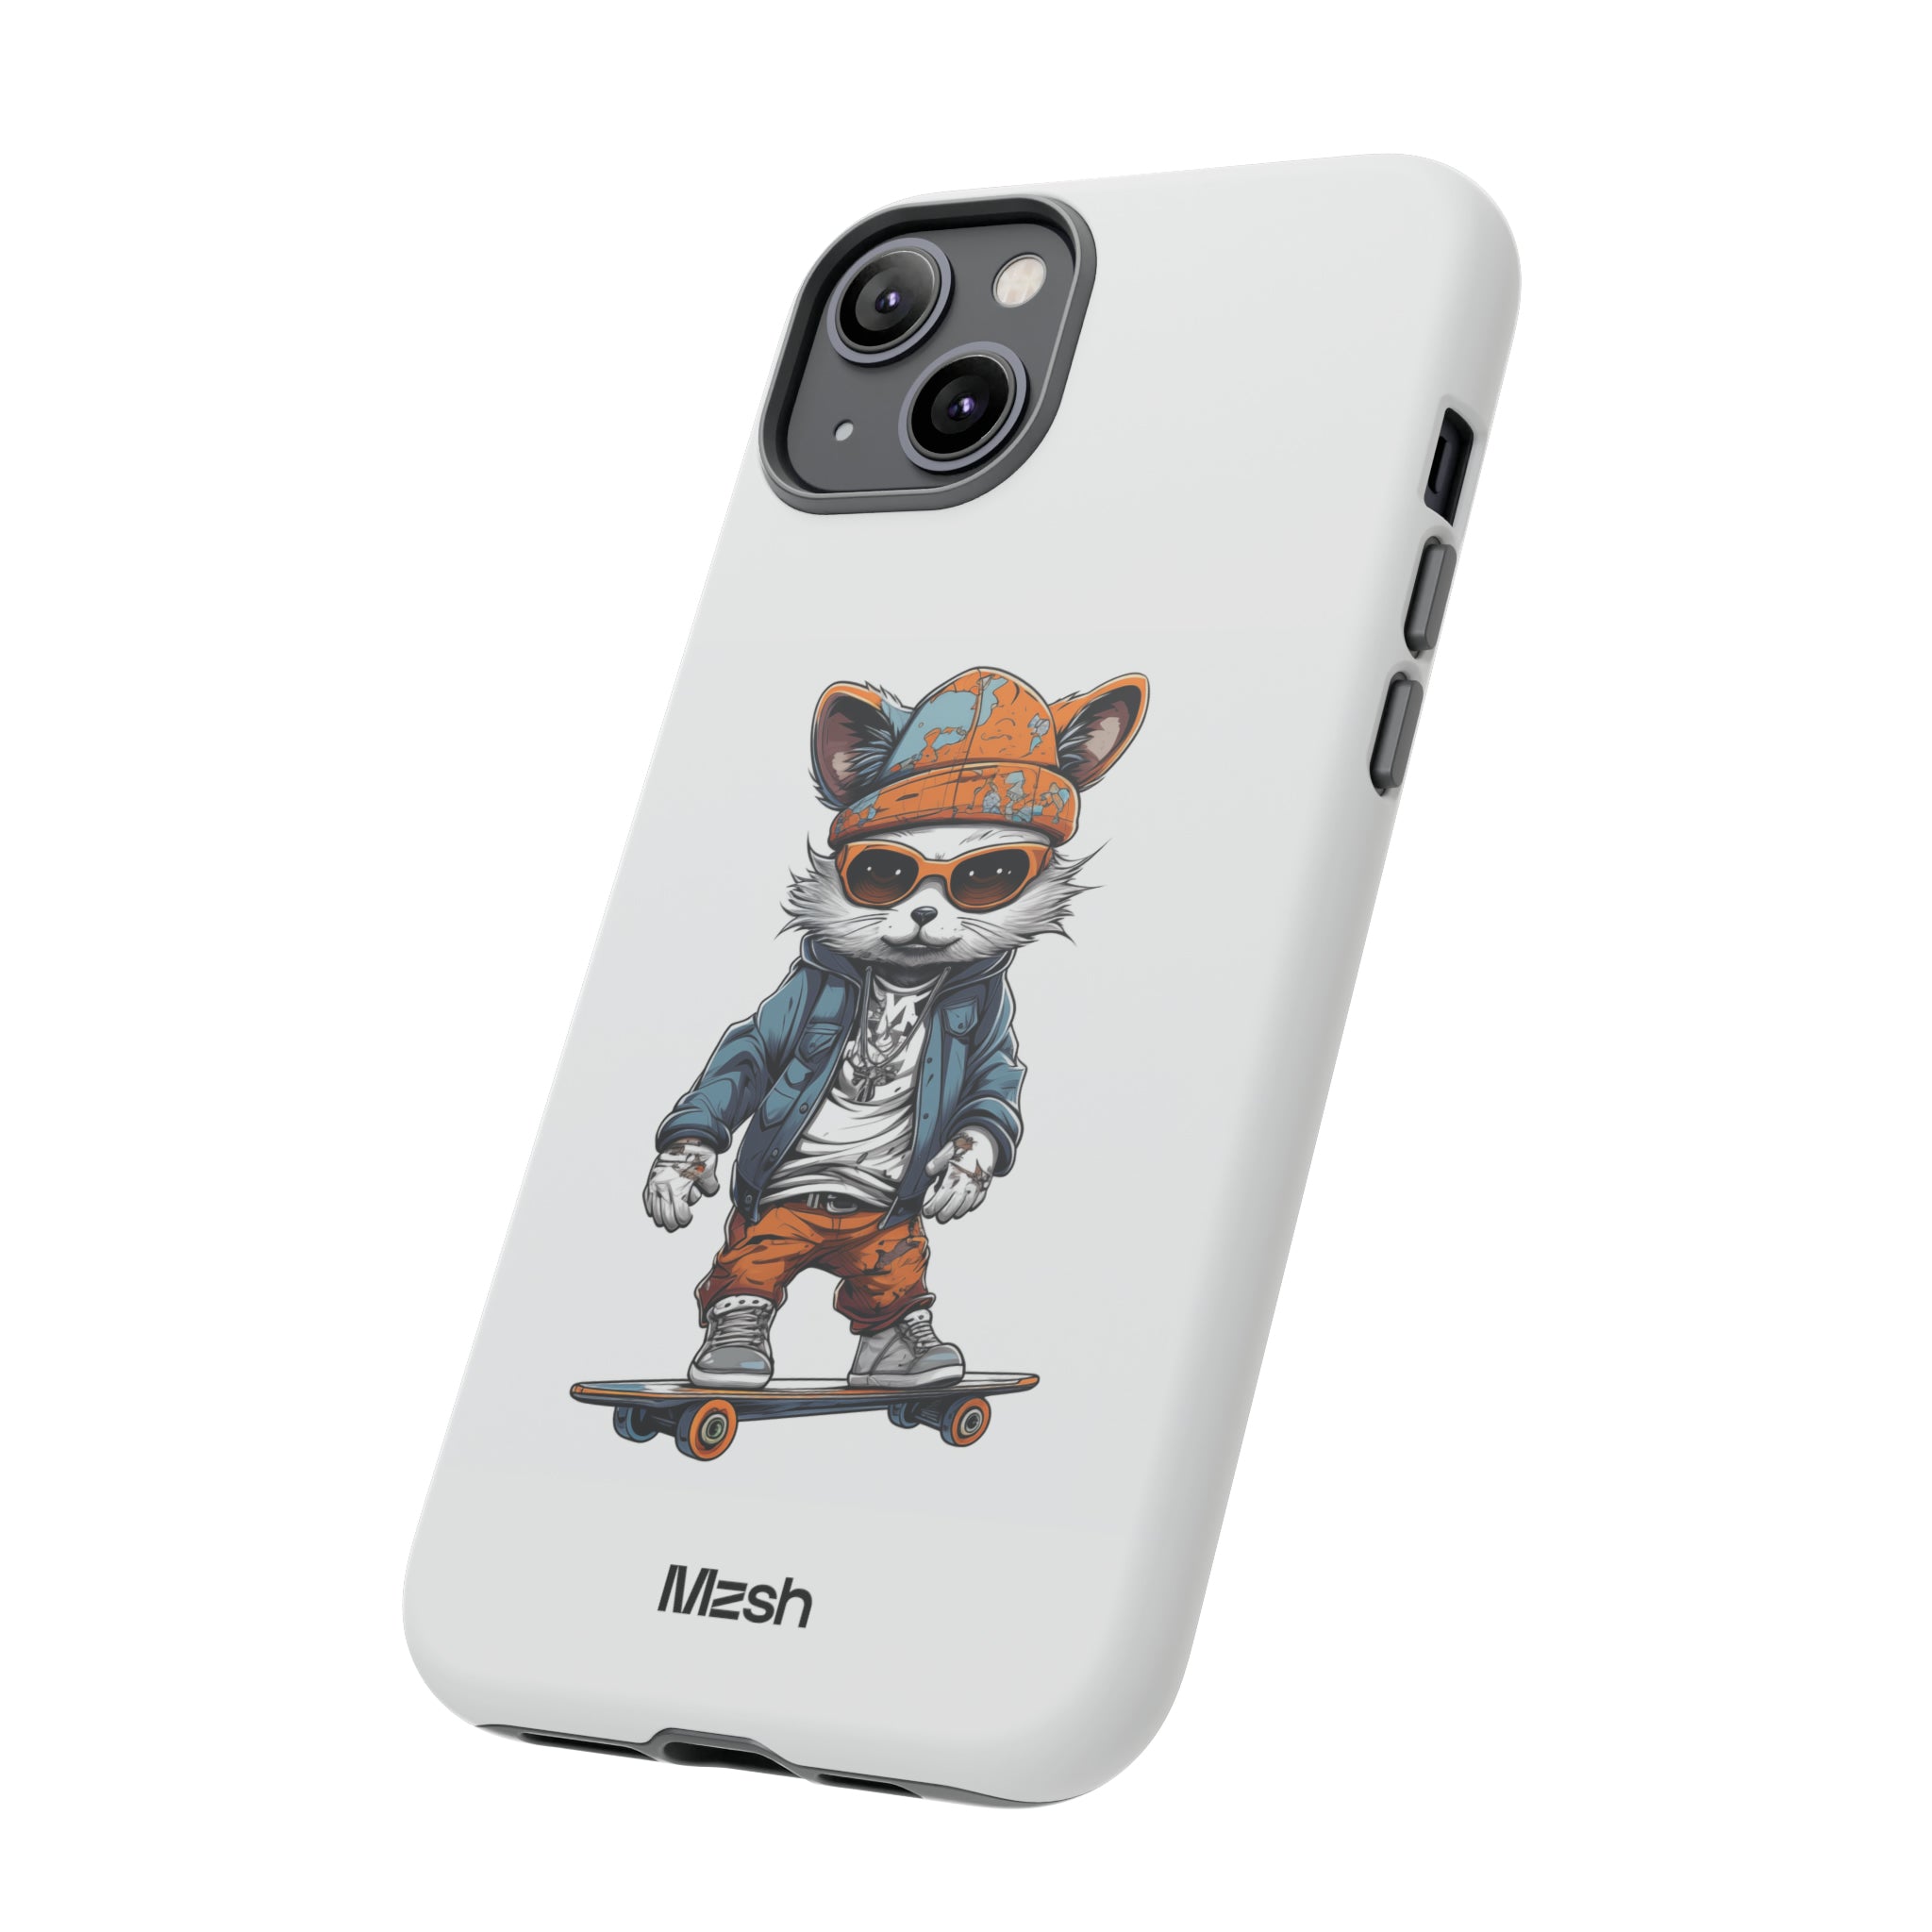 Purrfect Grind - iPhone Case